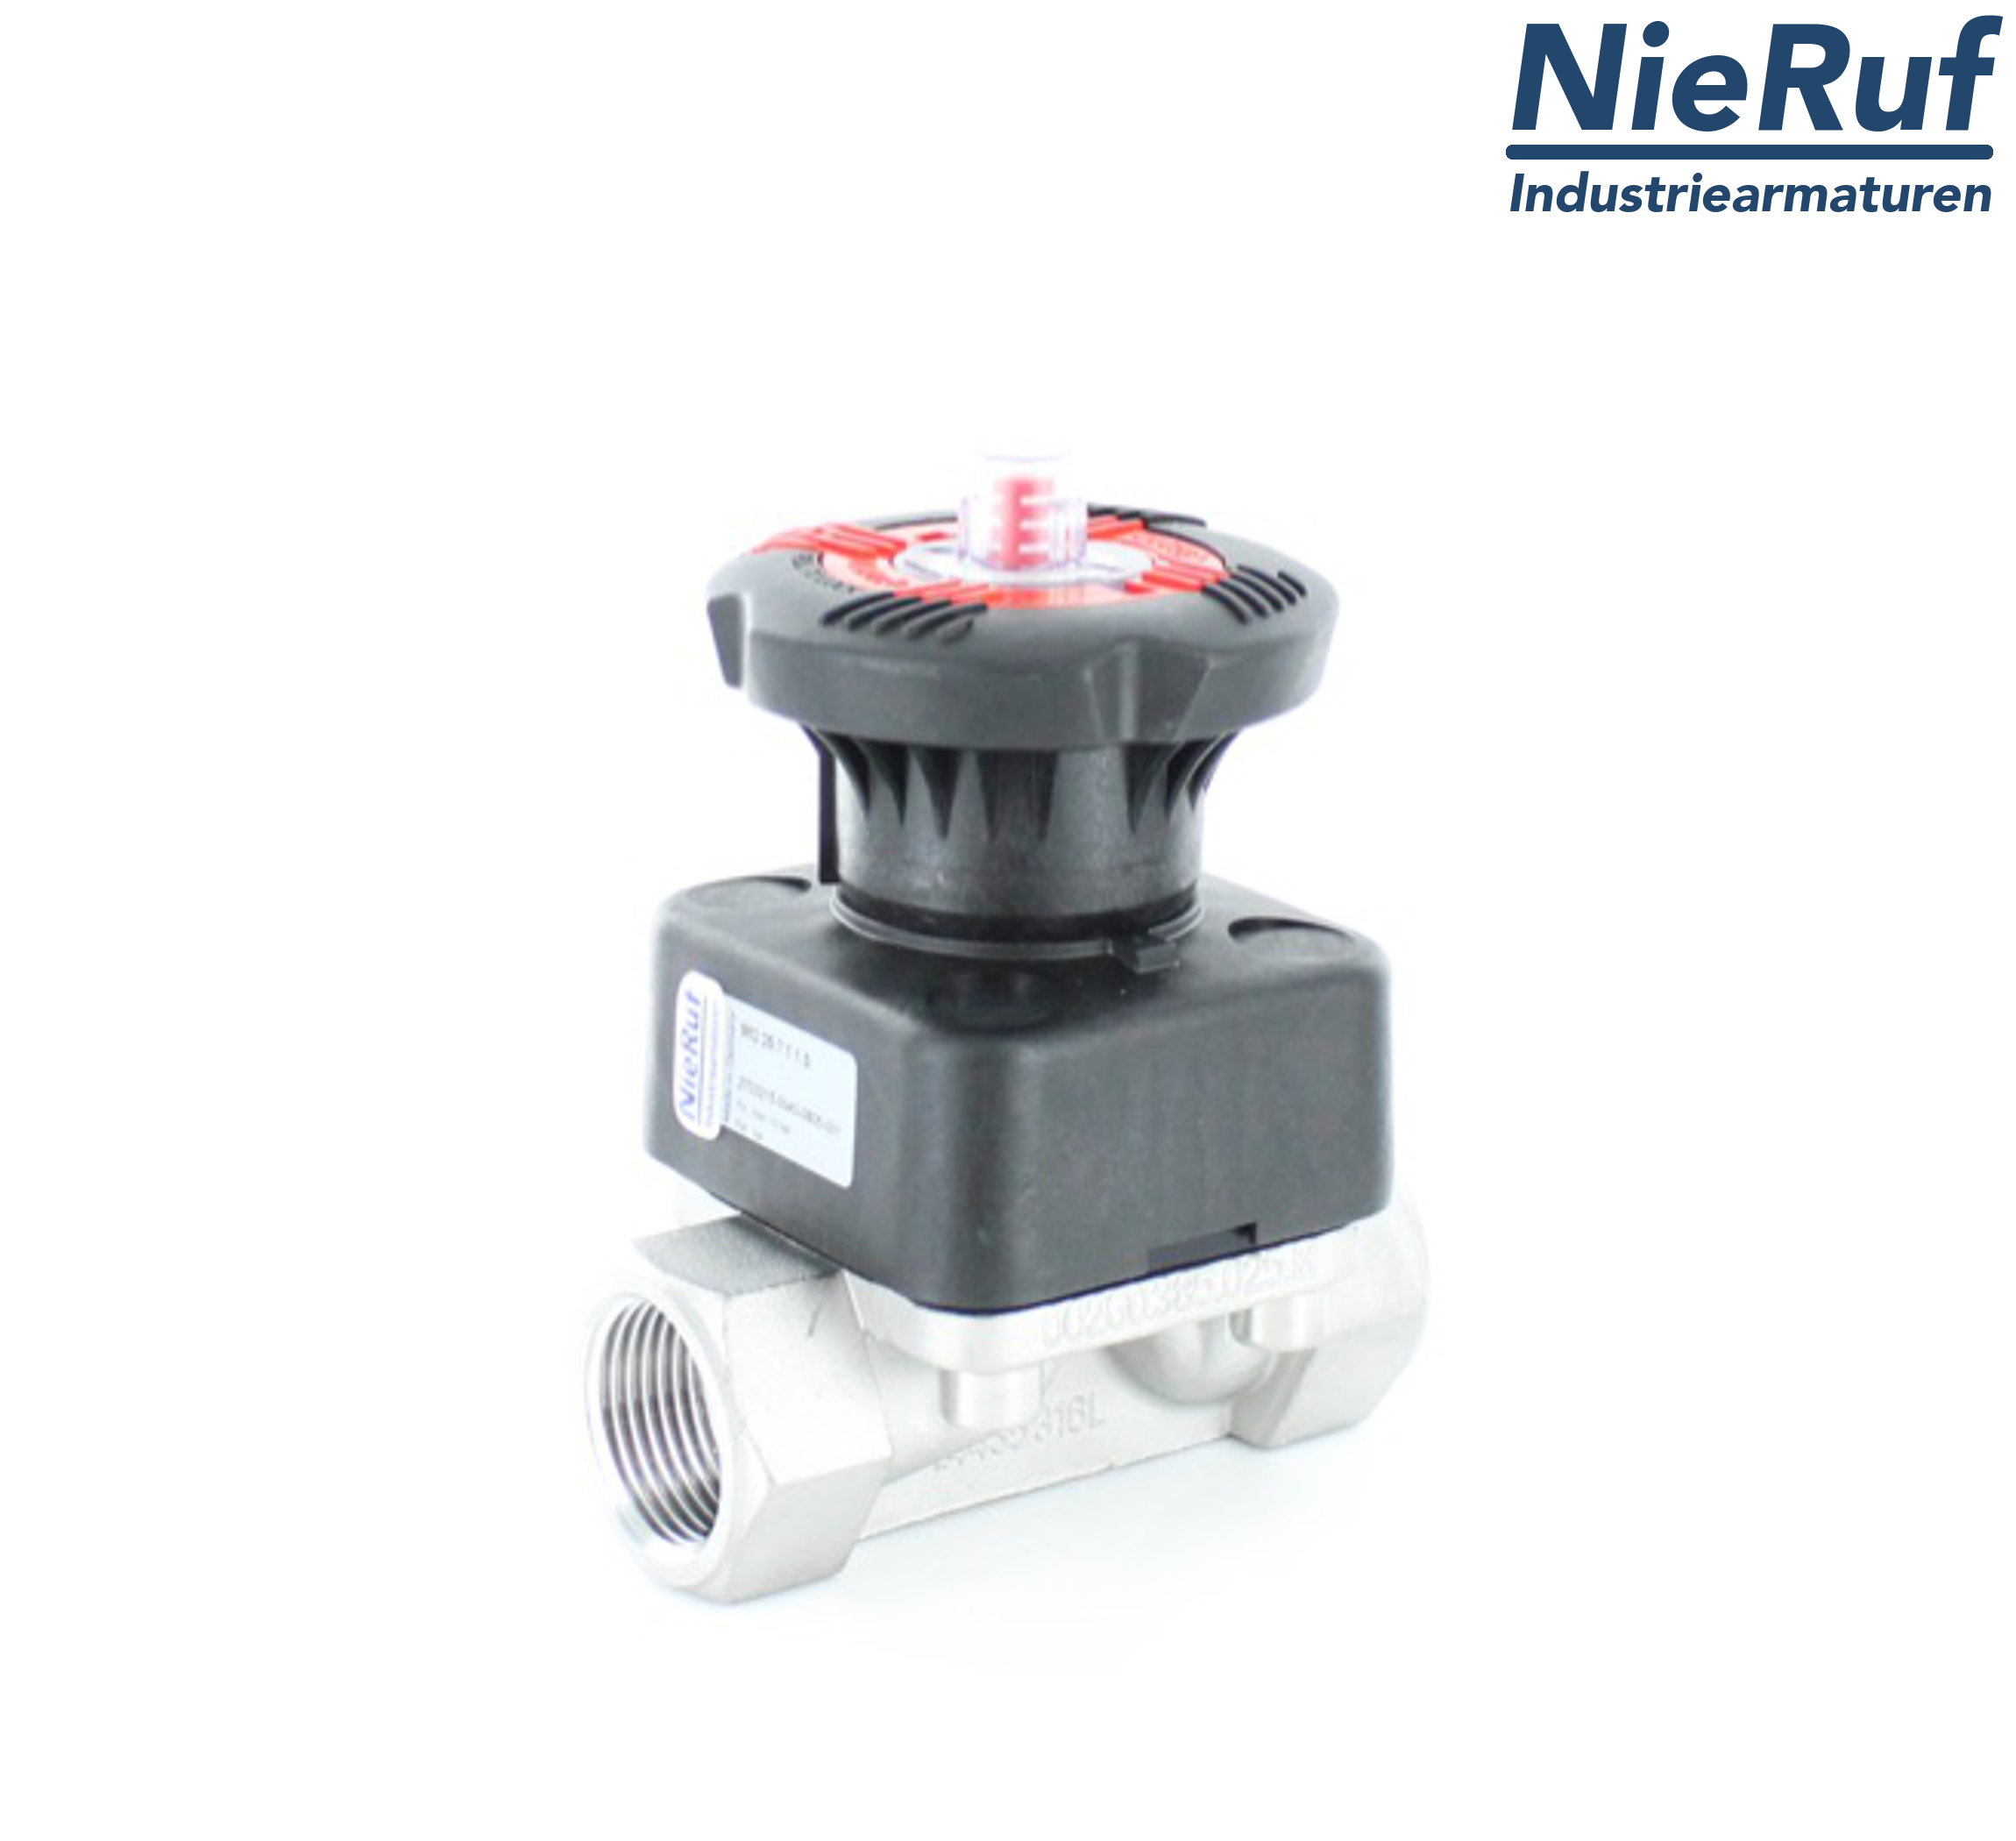 stainless steel-diaphragm valve 1 1/2 Inch membrane PTFE/EPDM two-piece female thread BSP